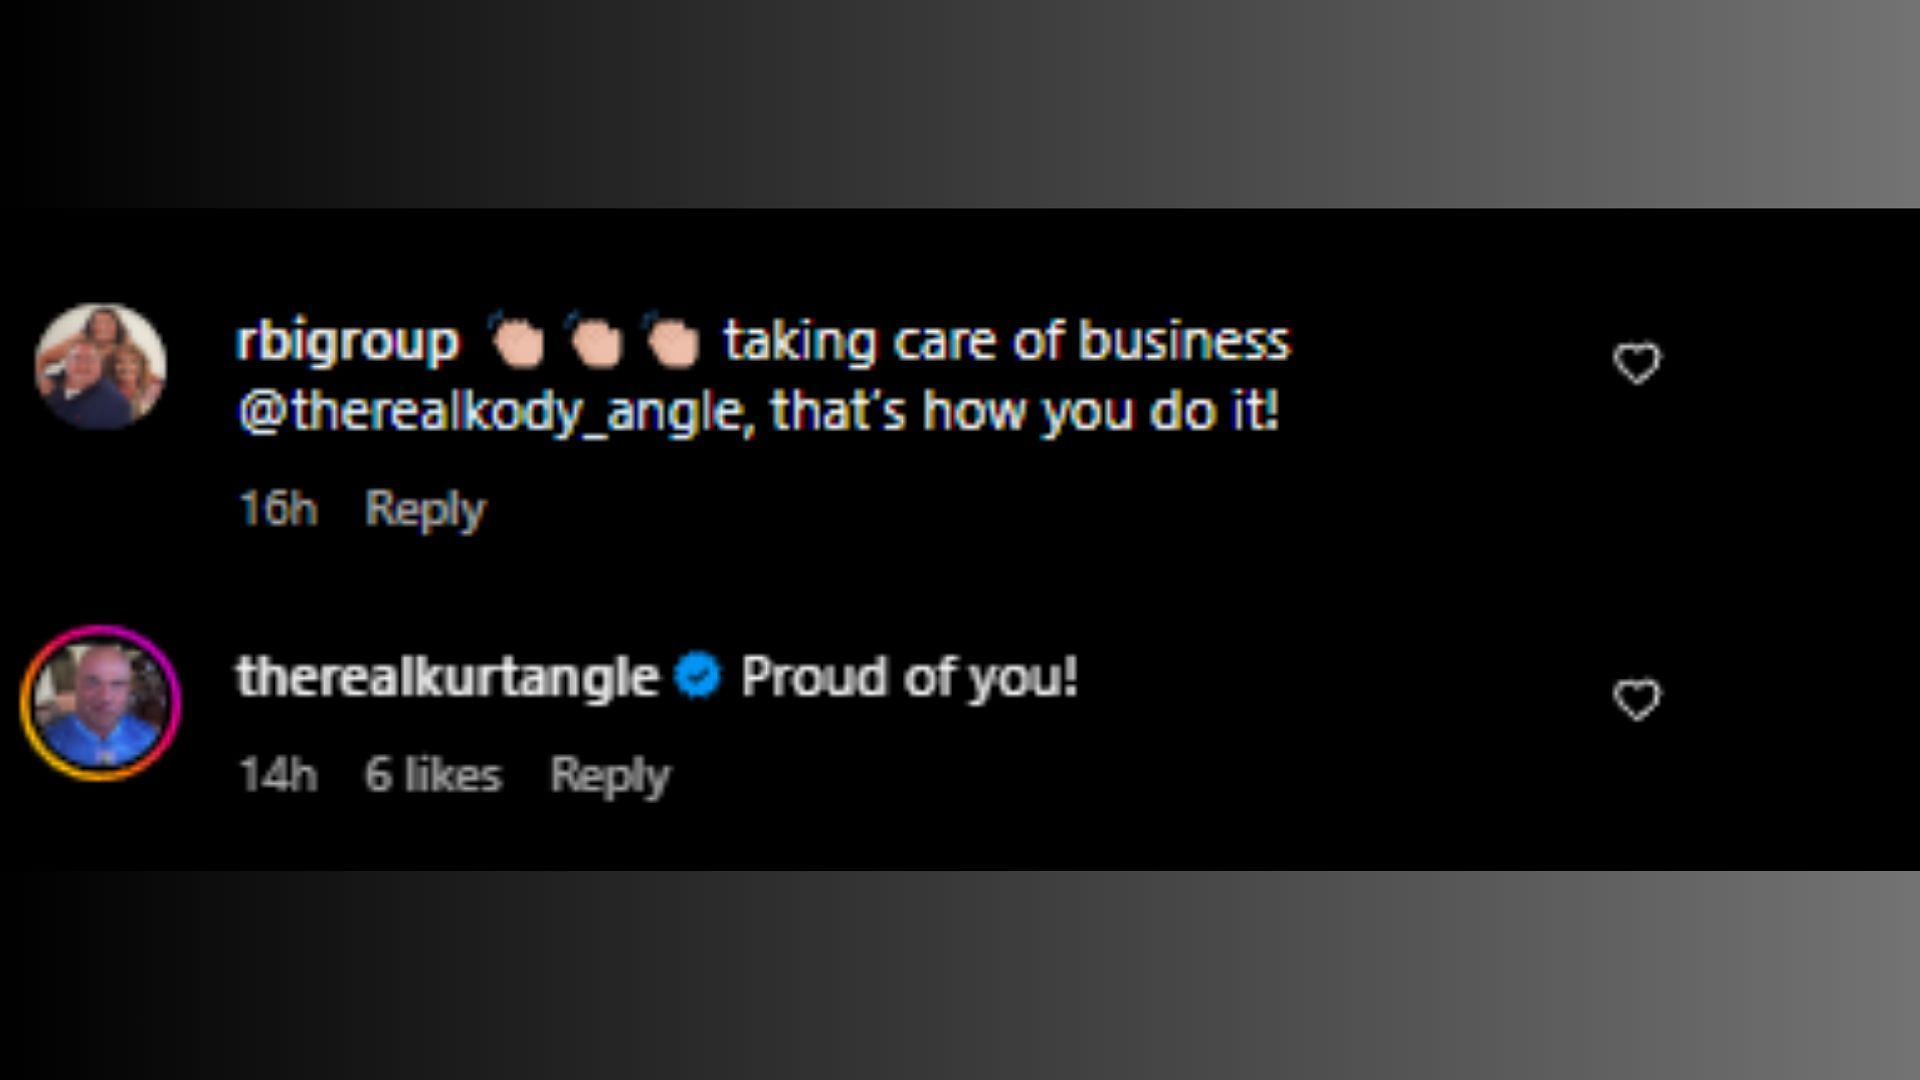 Kurt Angle left a comment in the video